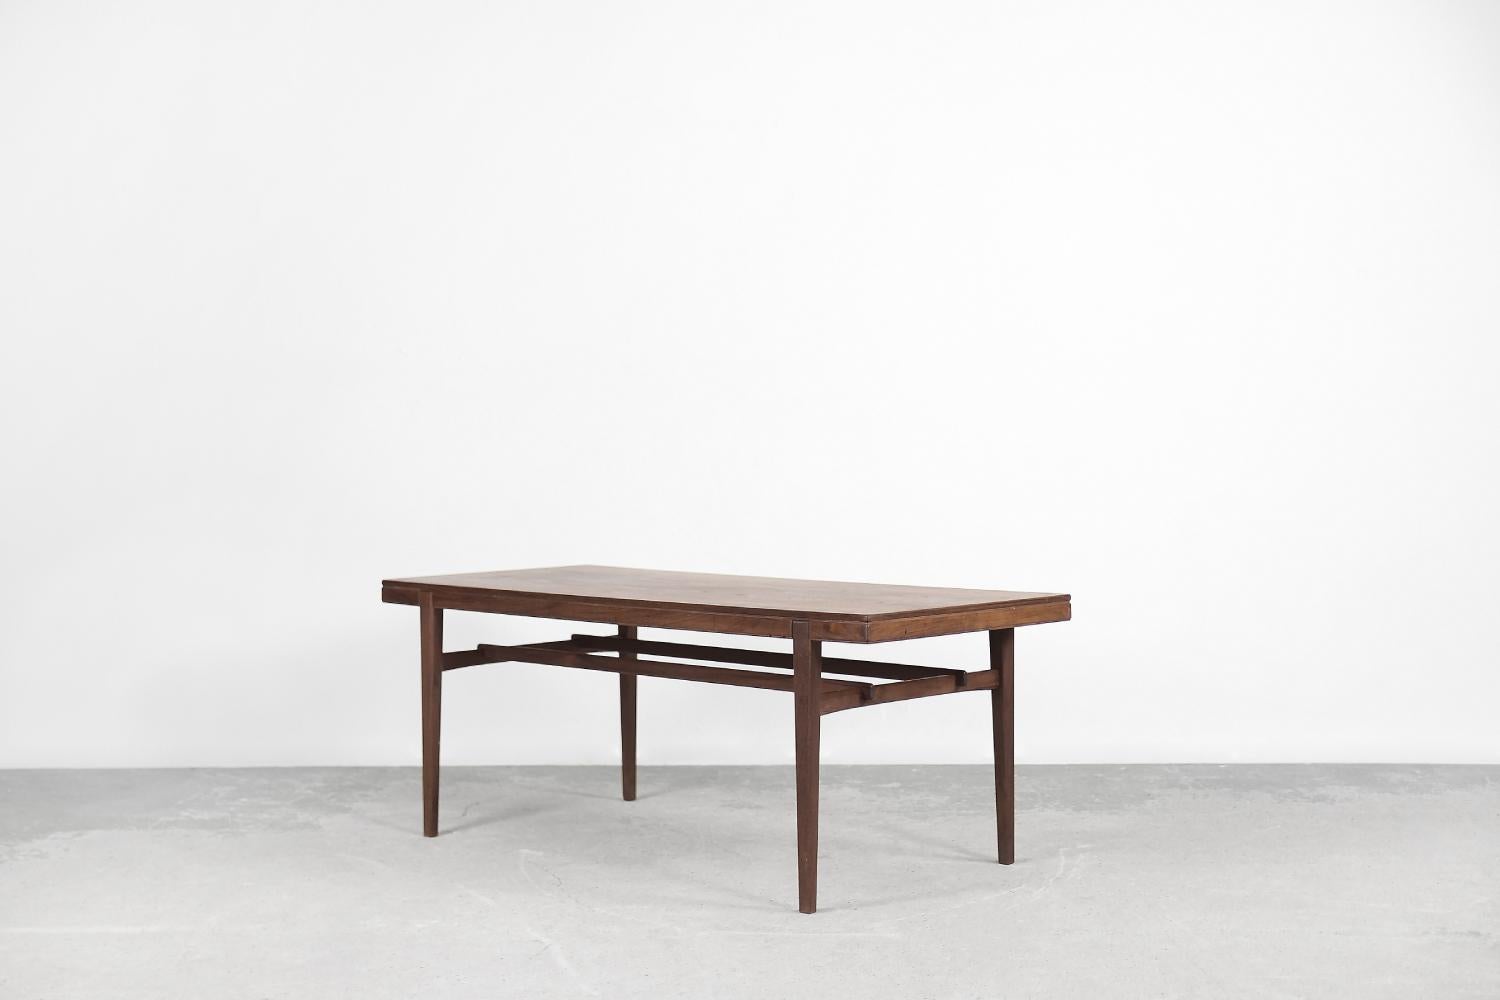 This Cosmos coffee table was designed by Sven Engström and Gunnar Myrstrand for the Swedish Tingströms manufacture during the 1960s. It is made of teak wood, which is extremely resistant to external factors and owes its longevity mainly to a